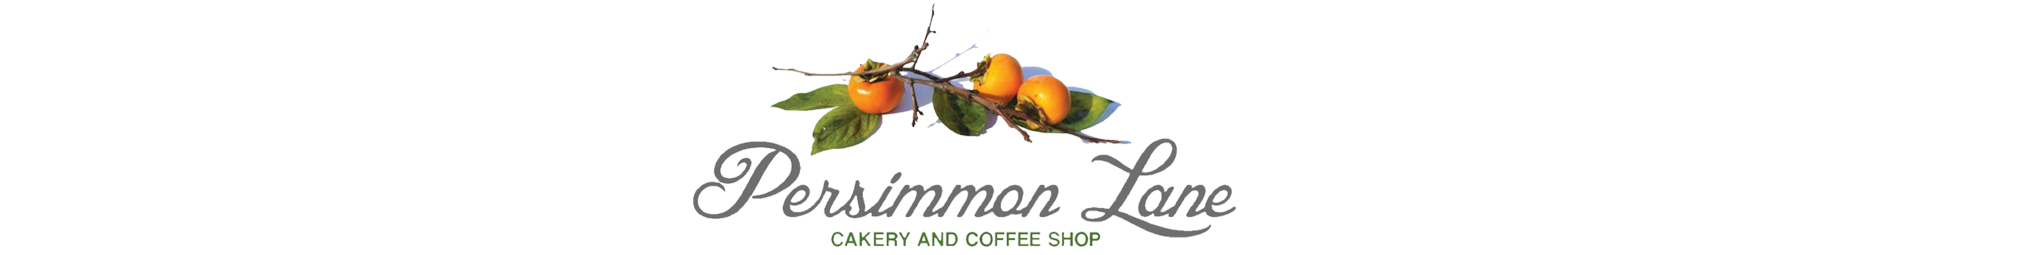 Persimmon Lane Cakery and Coffee Shop - Header Image